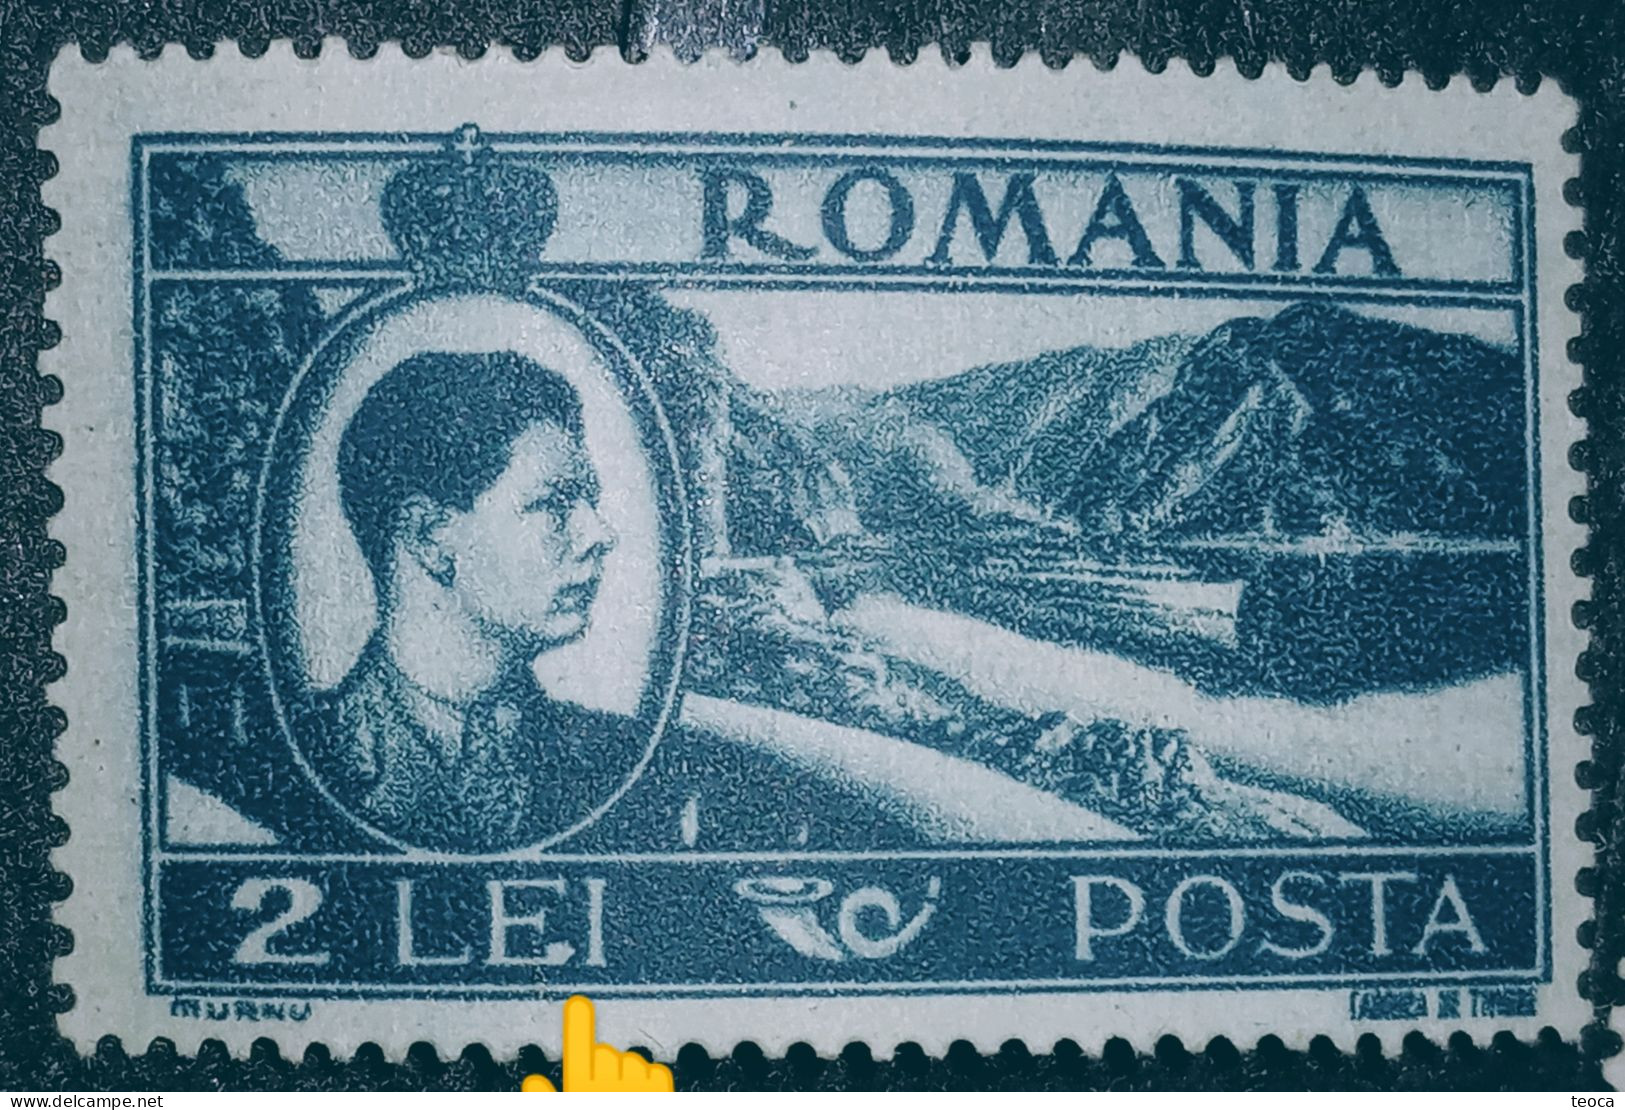 stamps errors Romania 1947 # Mi 1068 king Michael printed with a loop at the letter "E" on LEI unused